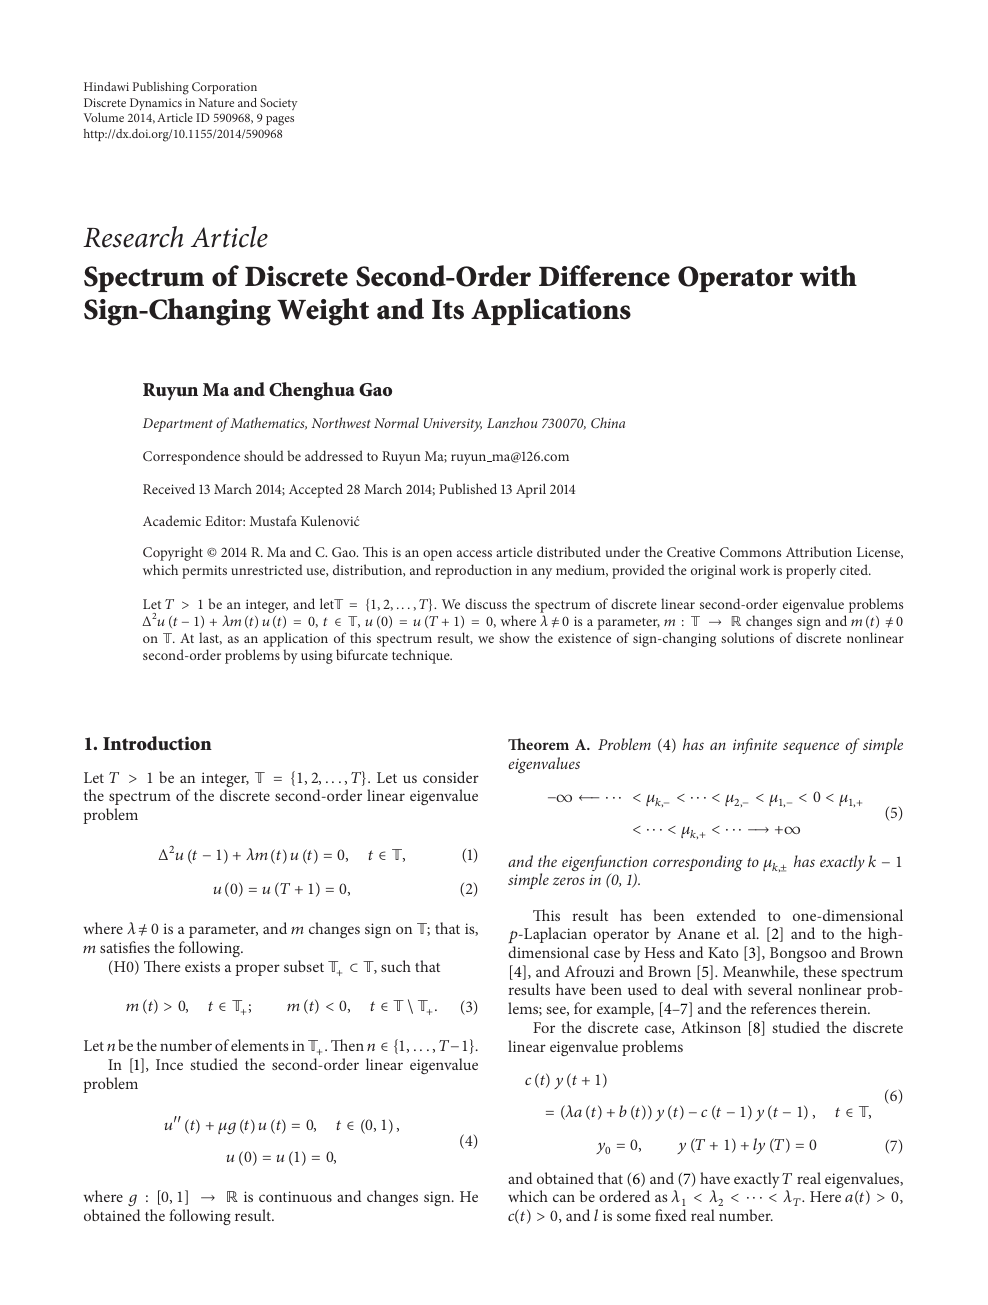 Spectrum Of Discrete Second Order Difference Operator With Sign Changing Weight And Its Applications Topic Of Research Paper In Mathematics Download Scholarly Article Pdf And Read For Free On Cyberleninka Open Science Hub